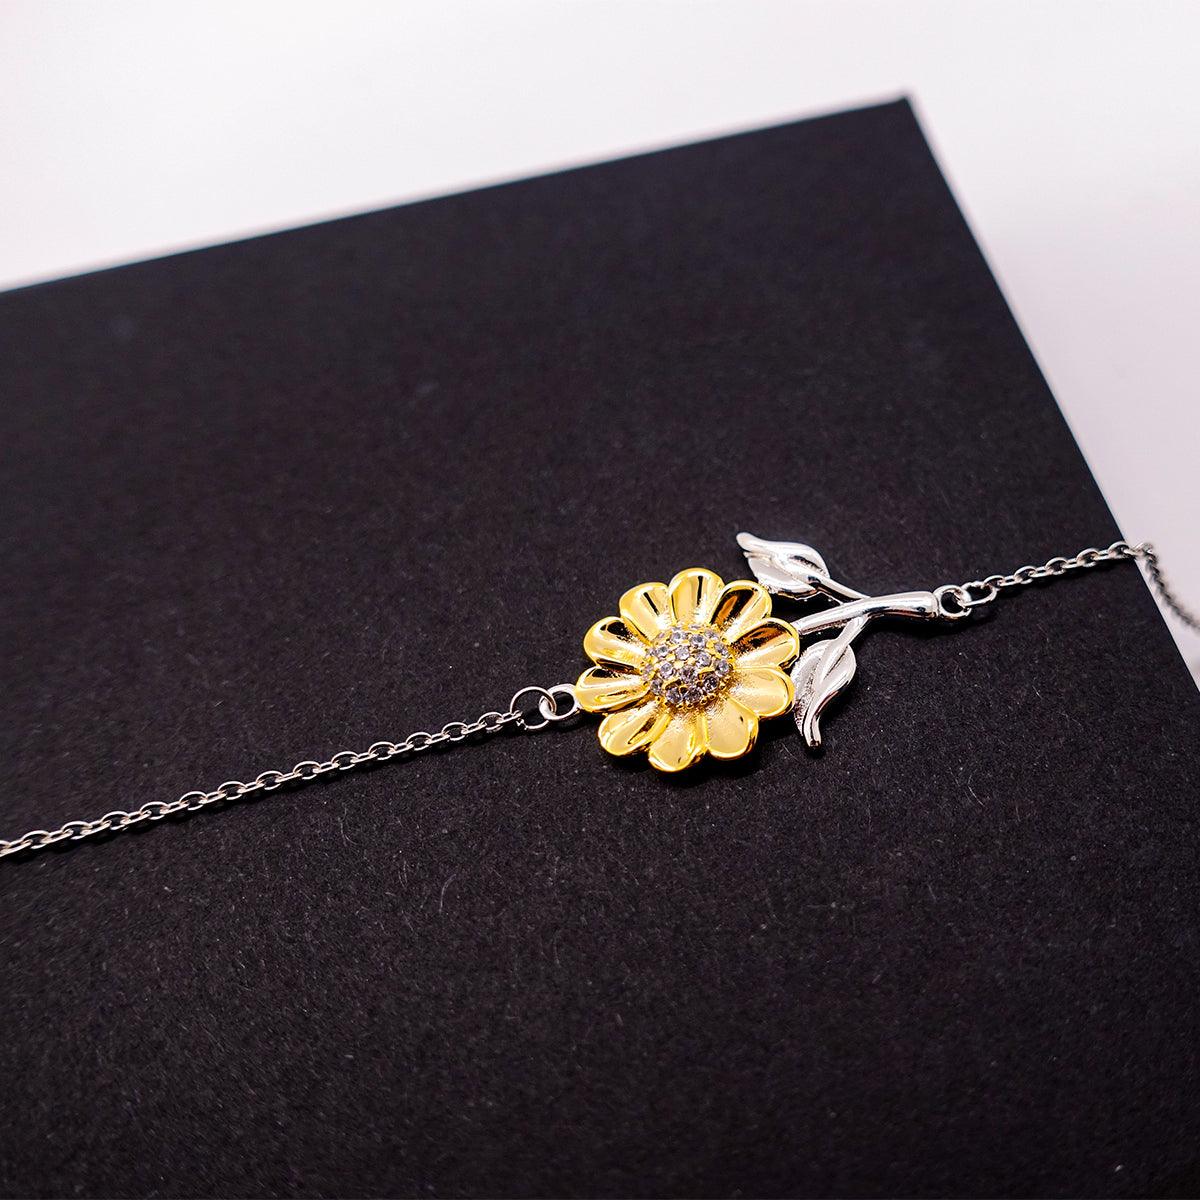 Drug Counselor Sunflower Bracelet - Thanks for being who you are - Birthday Christmas Jewelry Gifts Coworkers Colleague Boss - Mallard Moon Gift Shop